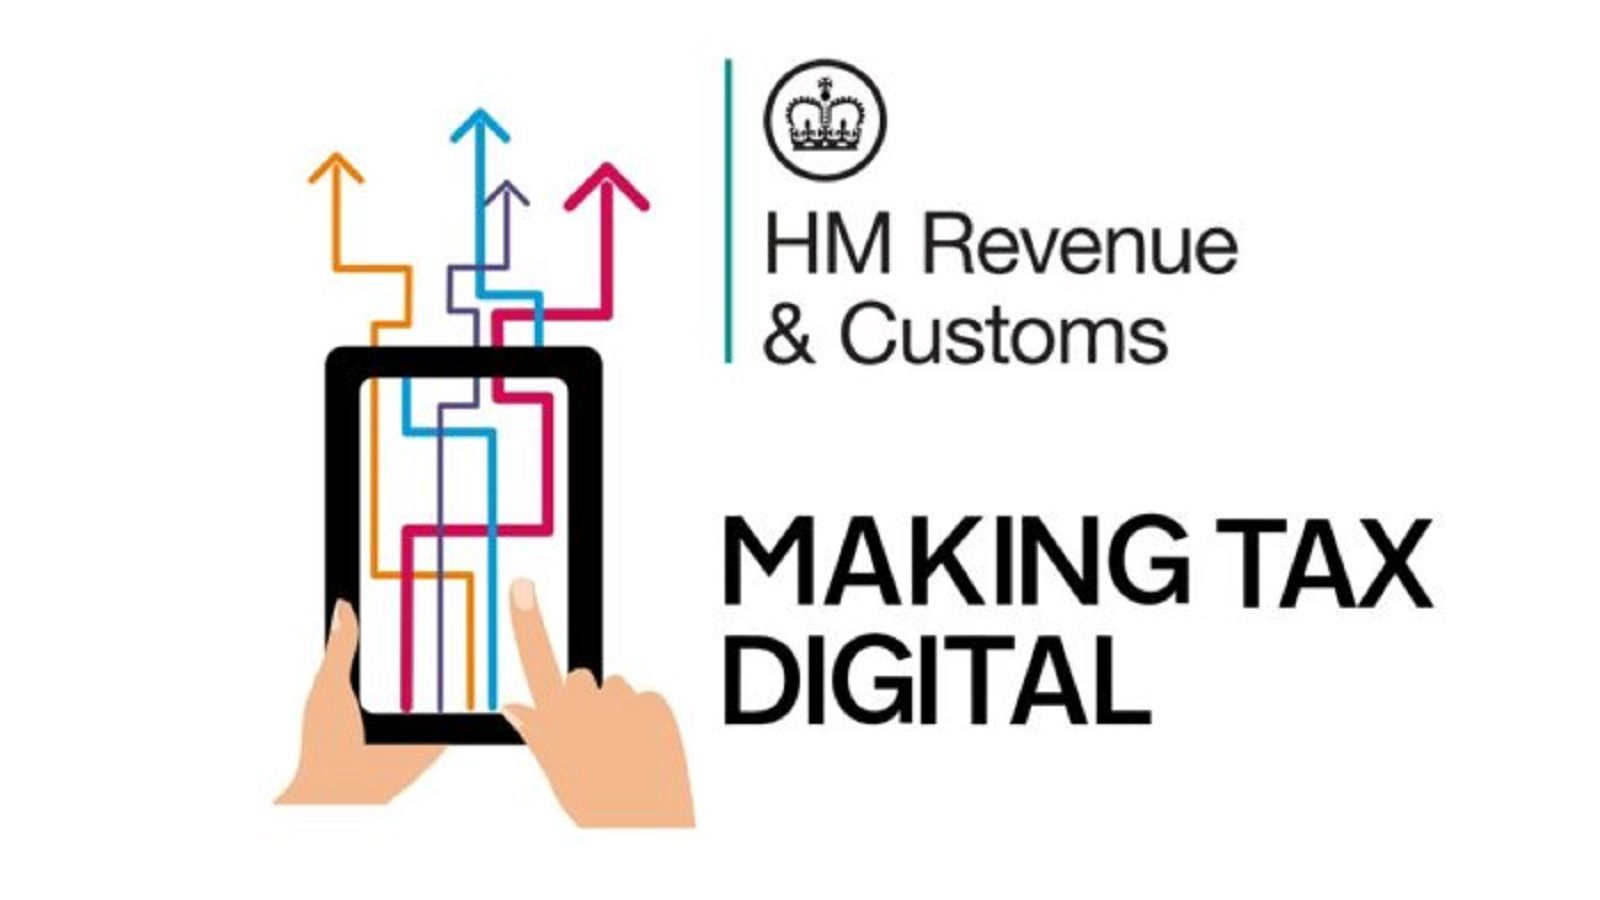 Image from HMRC Making Tax Digigtal Campaign